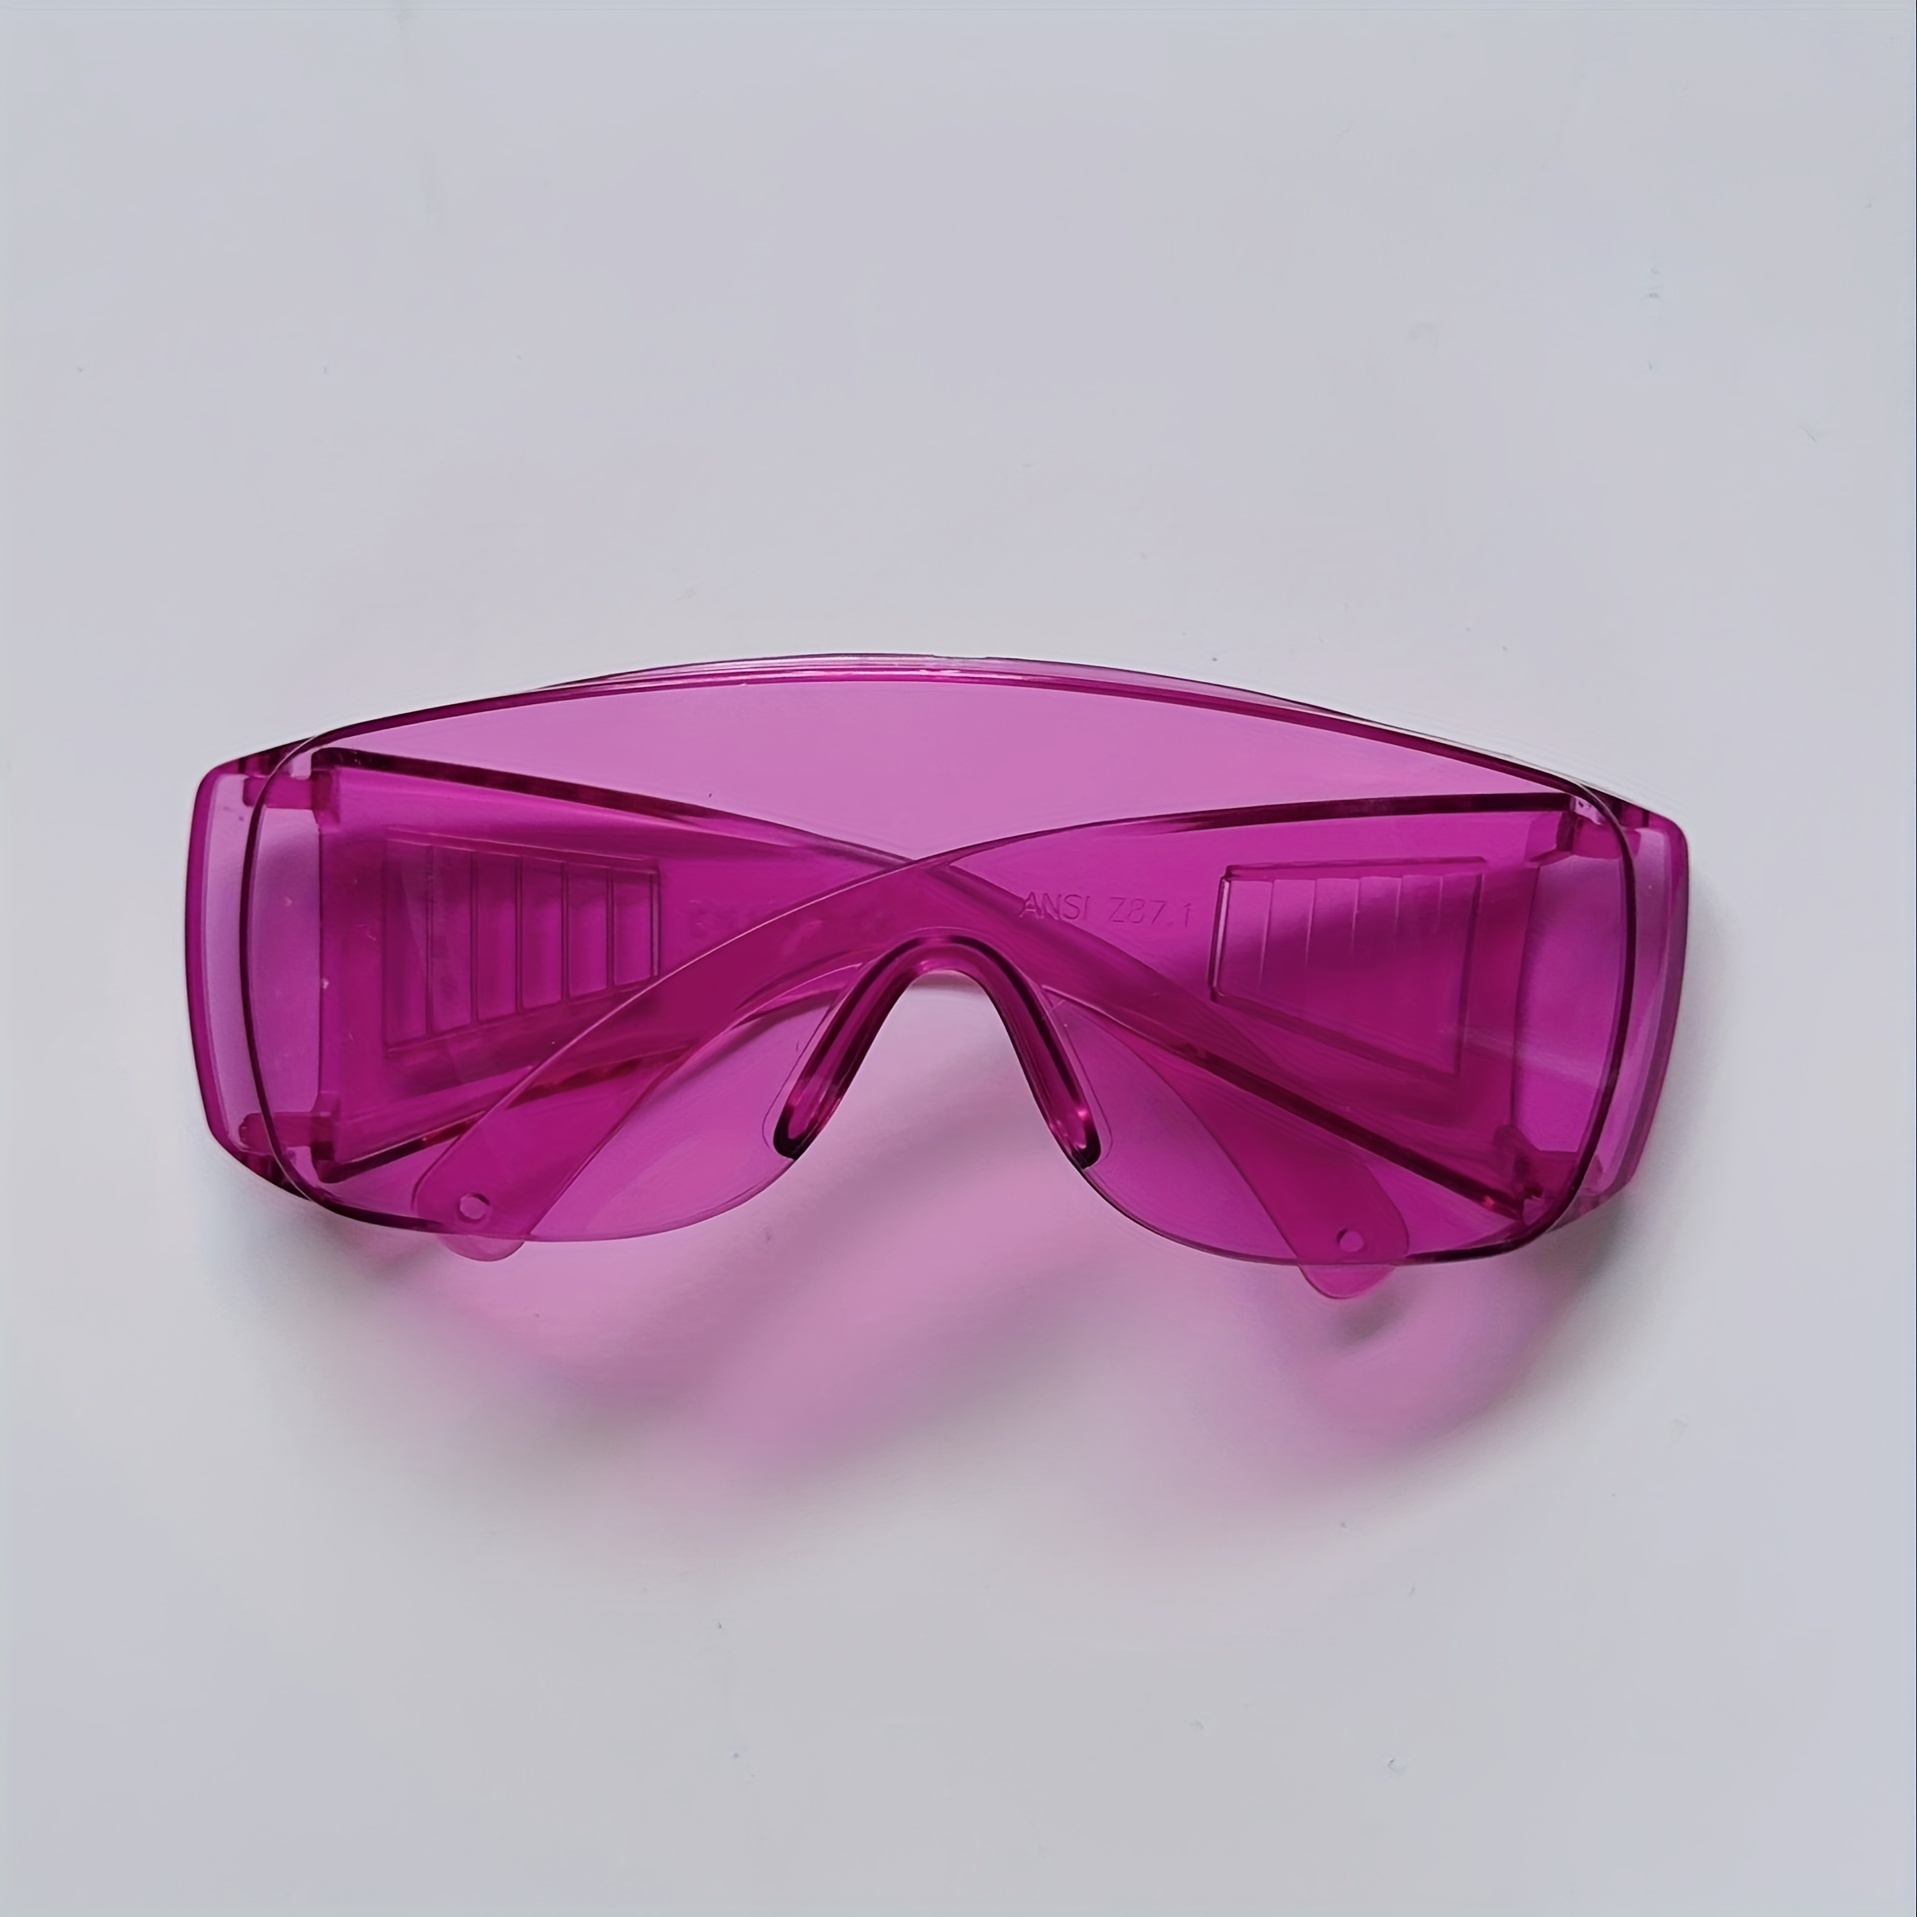 Colorful Glasses For Playing And Funny Fashion Closed Protective Glasses, Water Festival Color Style Glasses